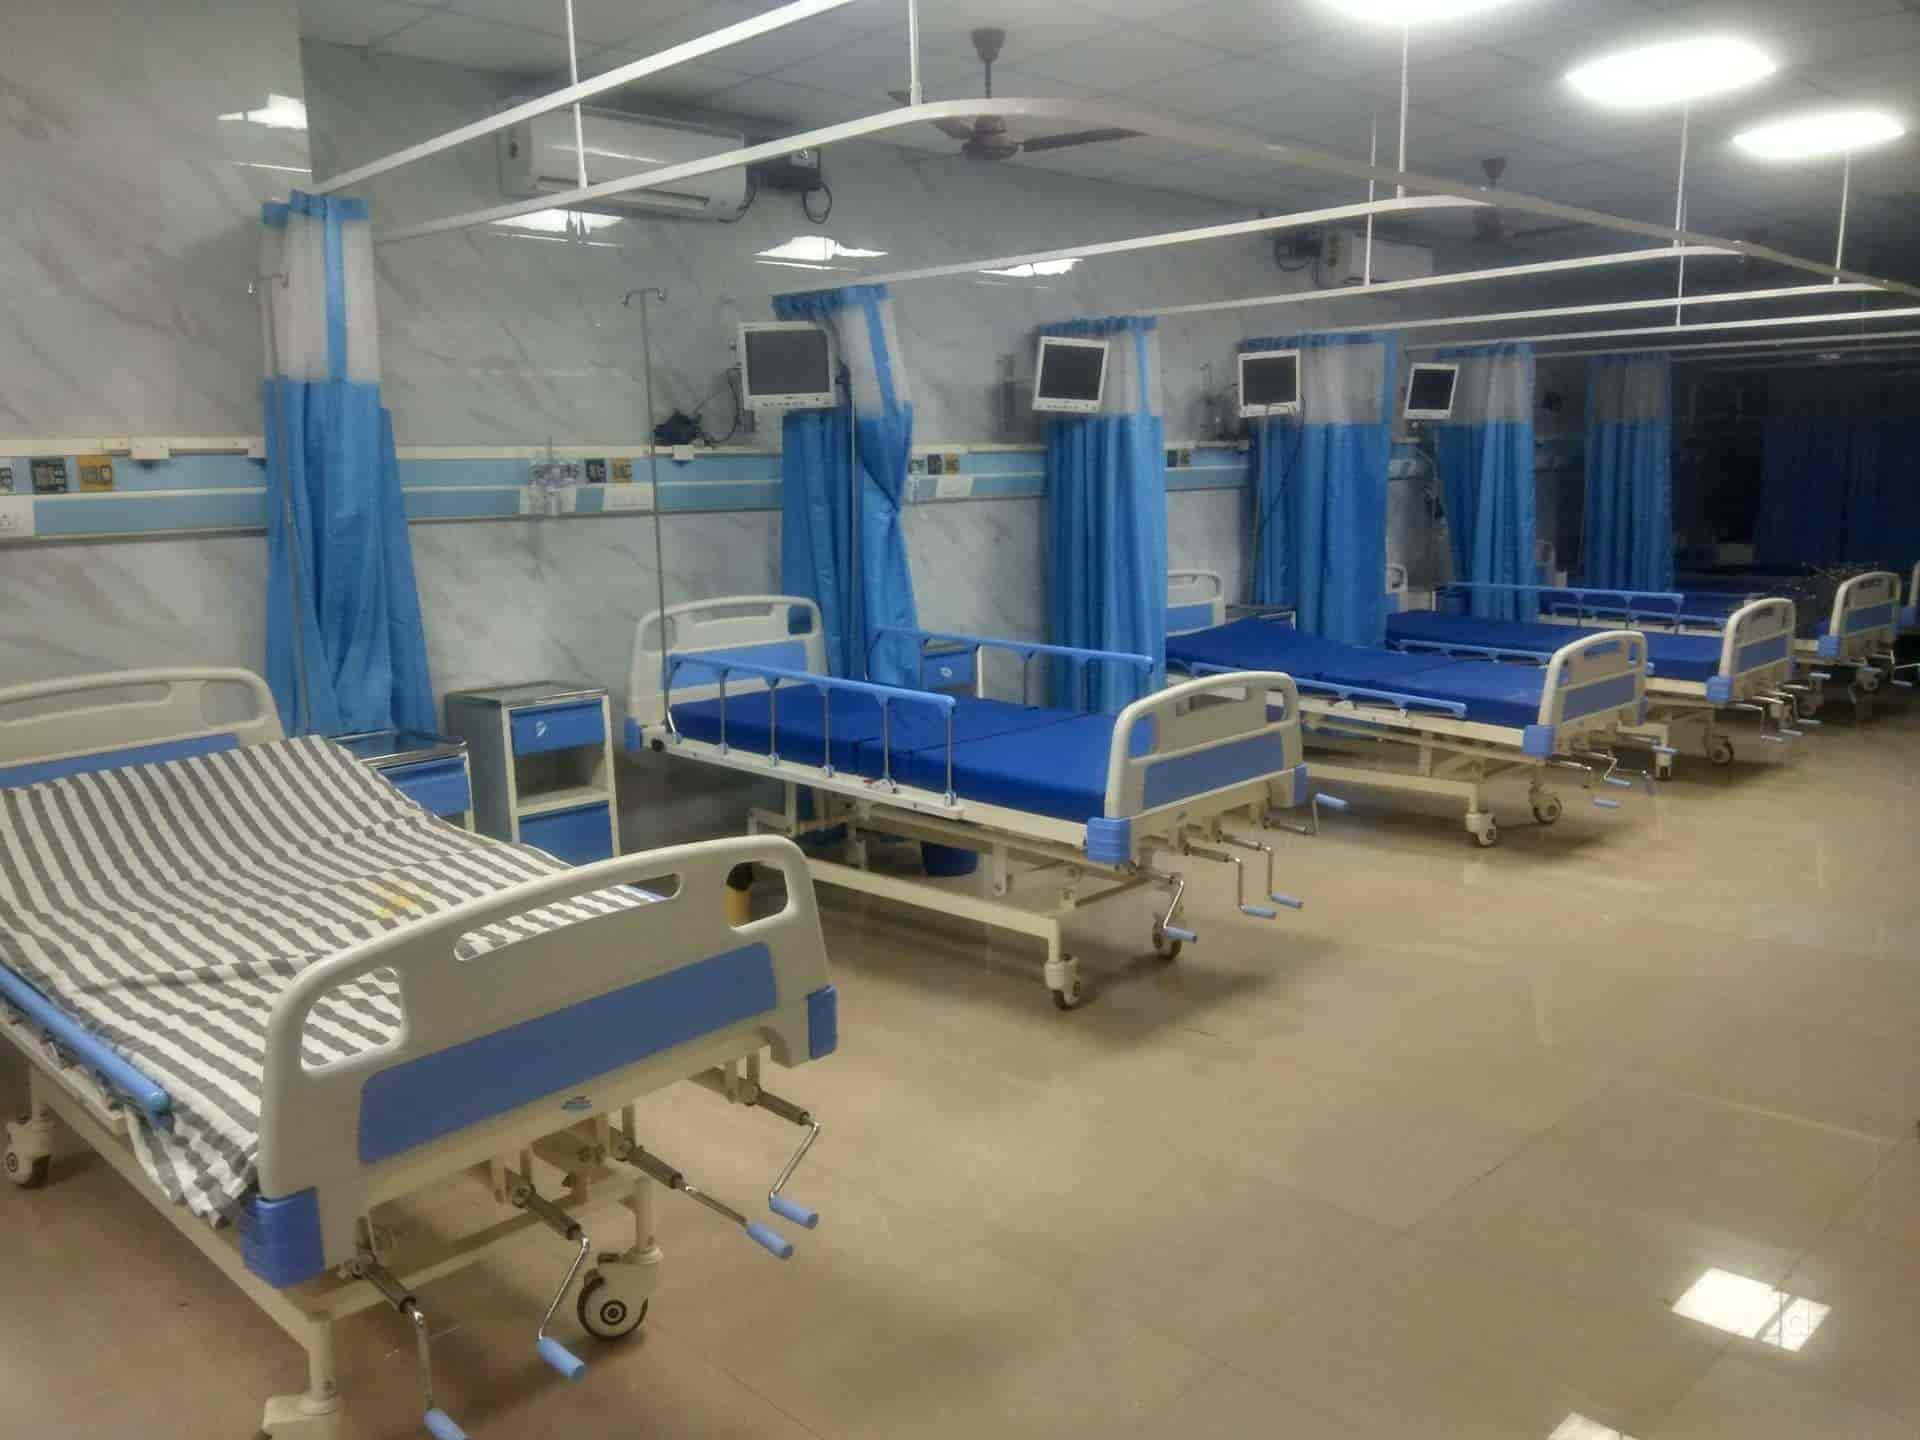 Modern Hospital Room Featuring a Fully Equipped Hospital Bed Wallpaper